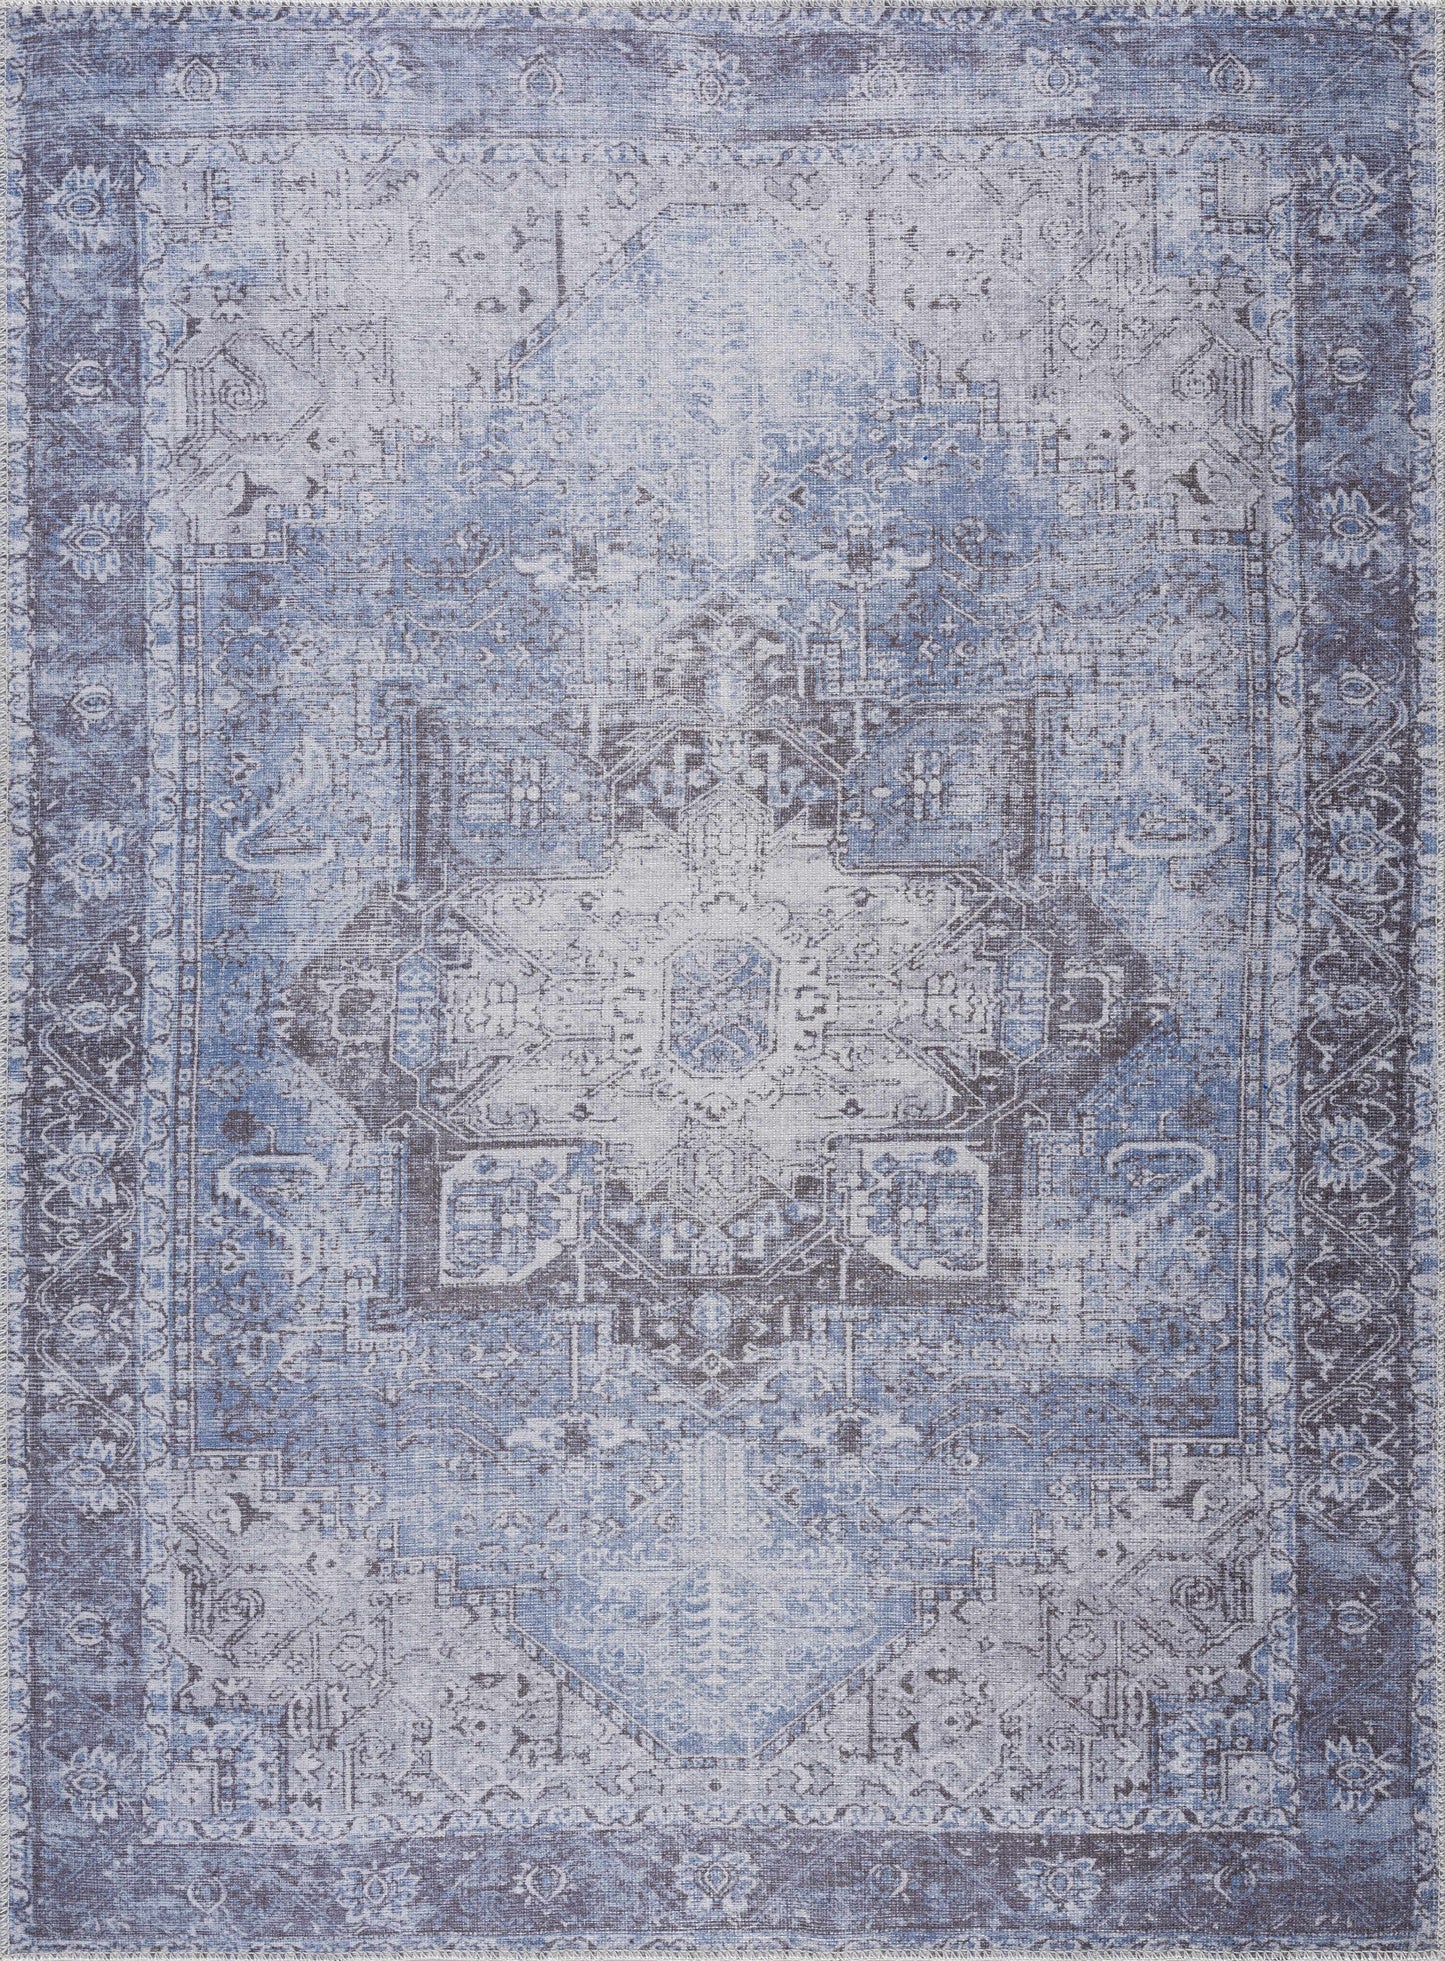 Boutique Rugs Rugs Rosman Blue Washable Area Rug